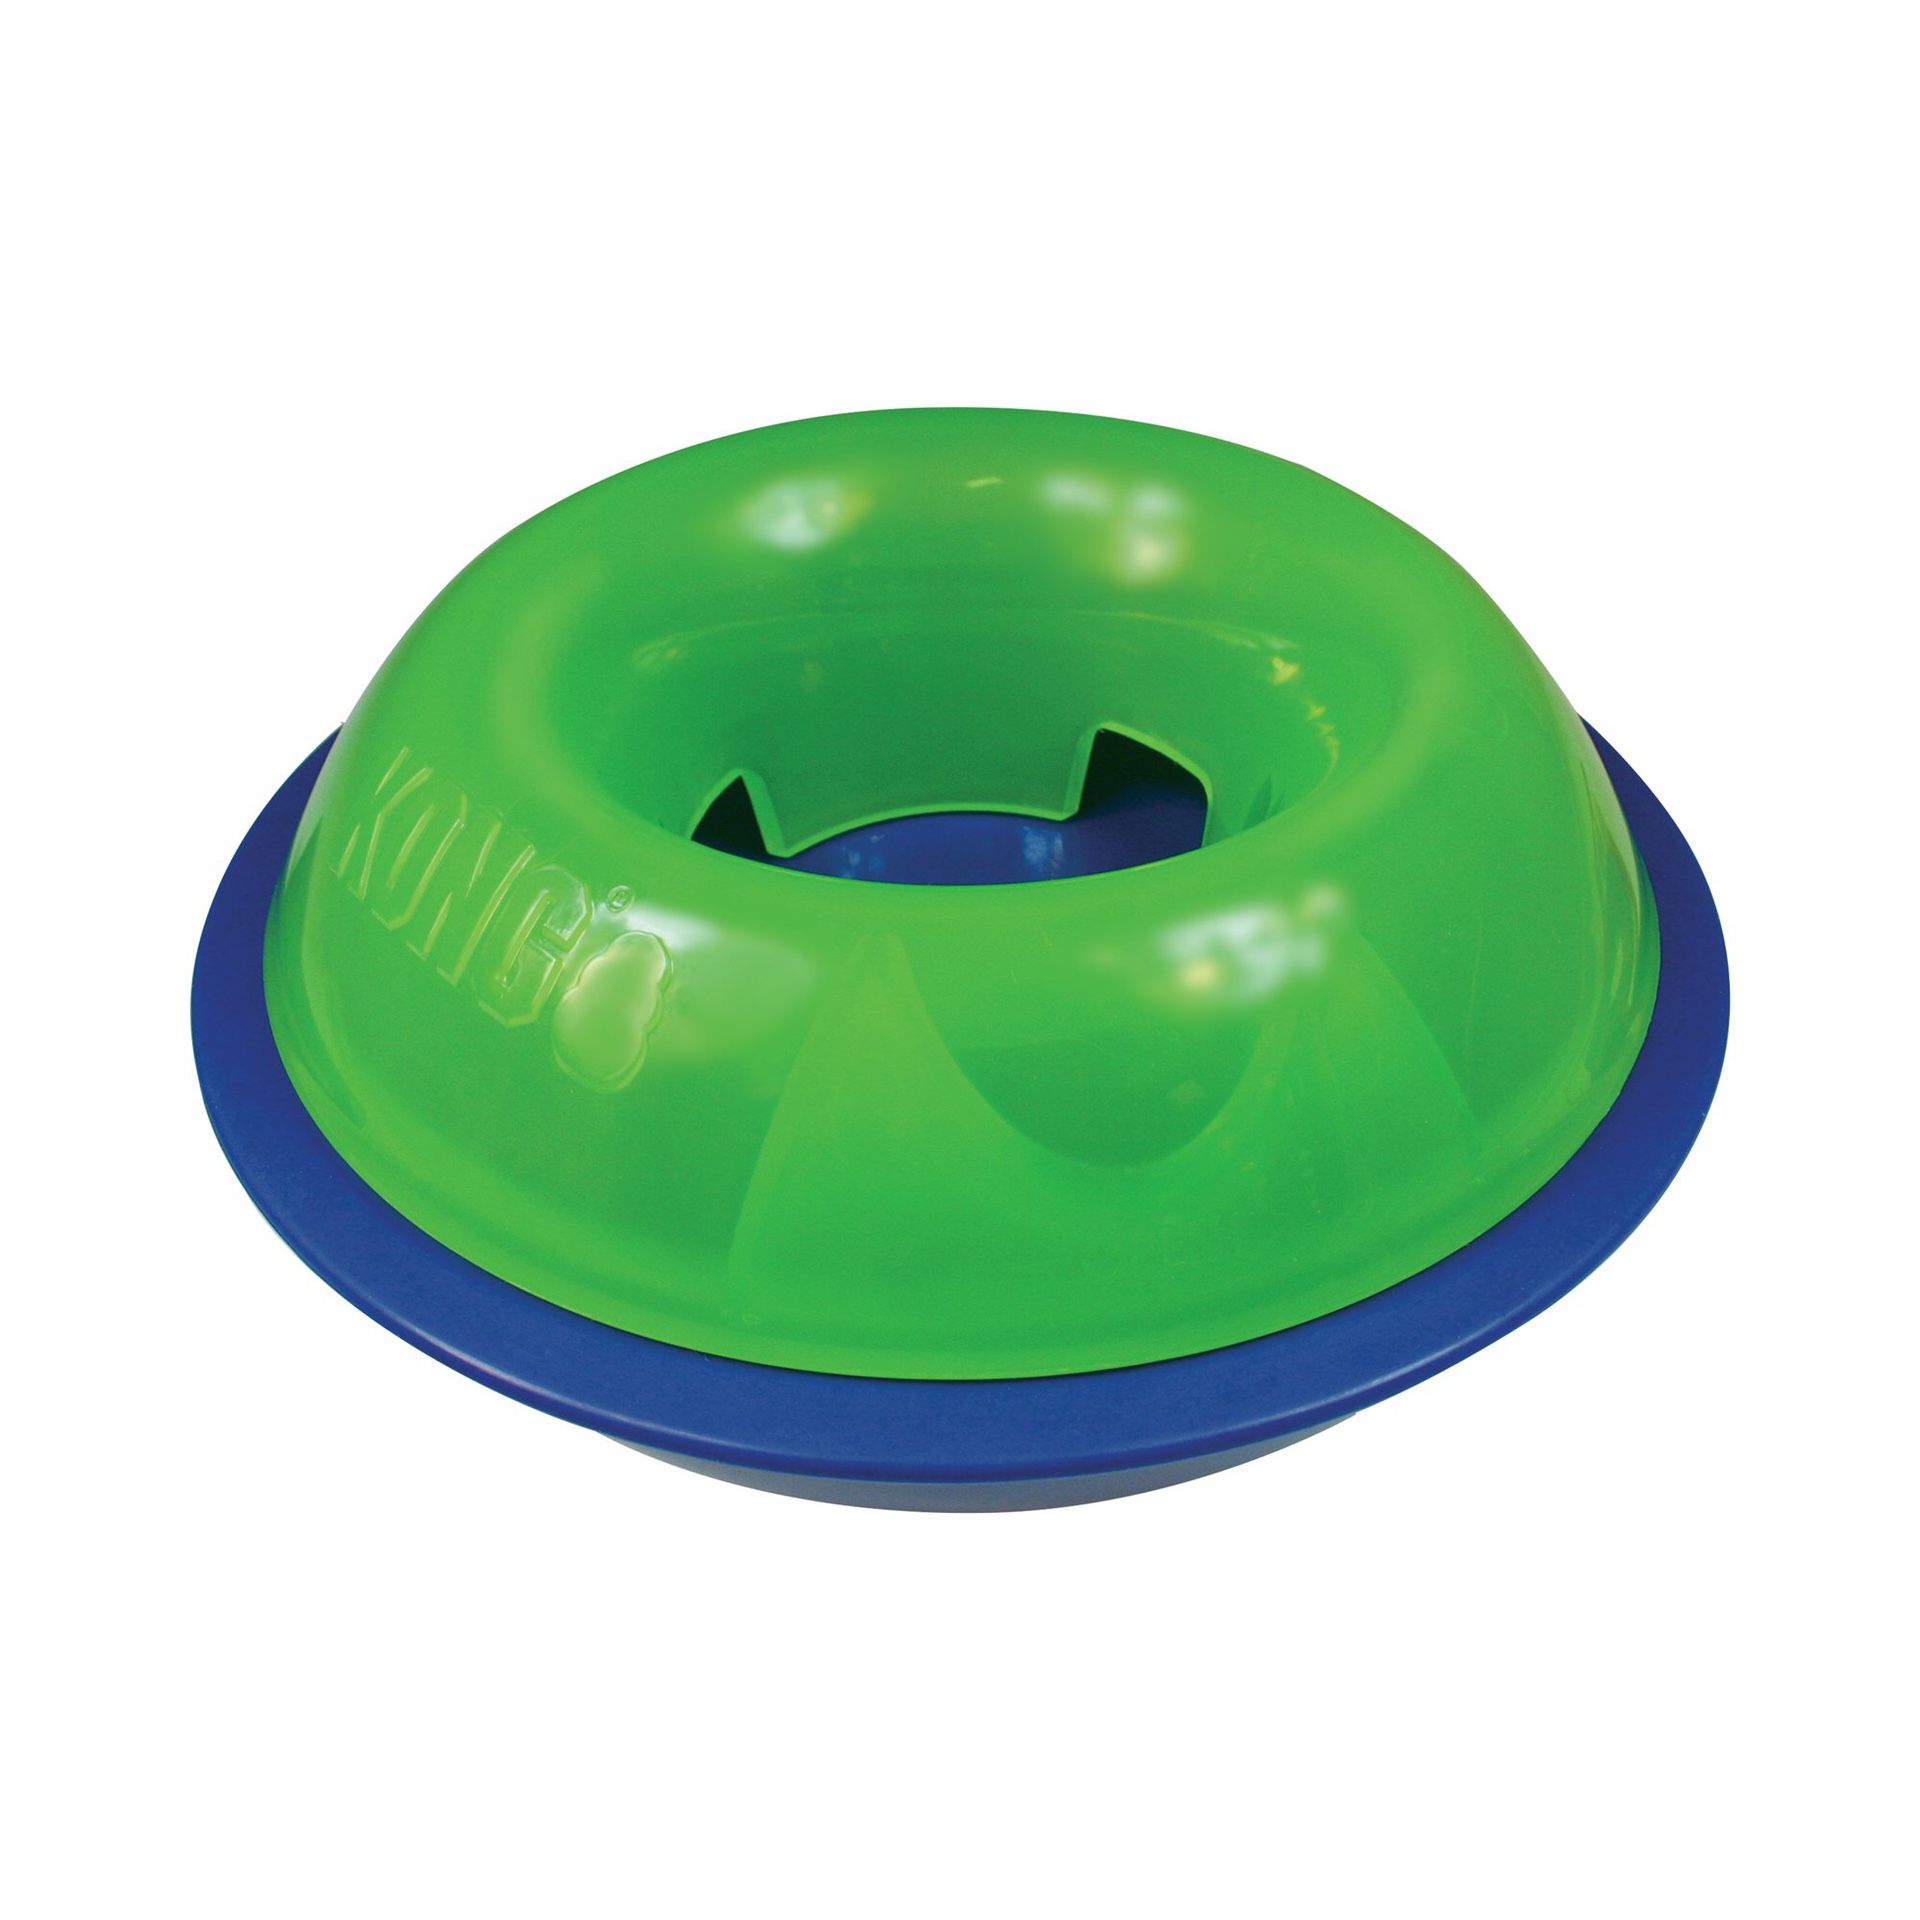 Have an energetic dog that likes to chew? Free Kong extra strong dry feeder to keep dog entertained